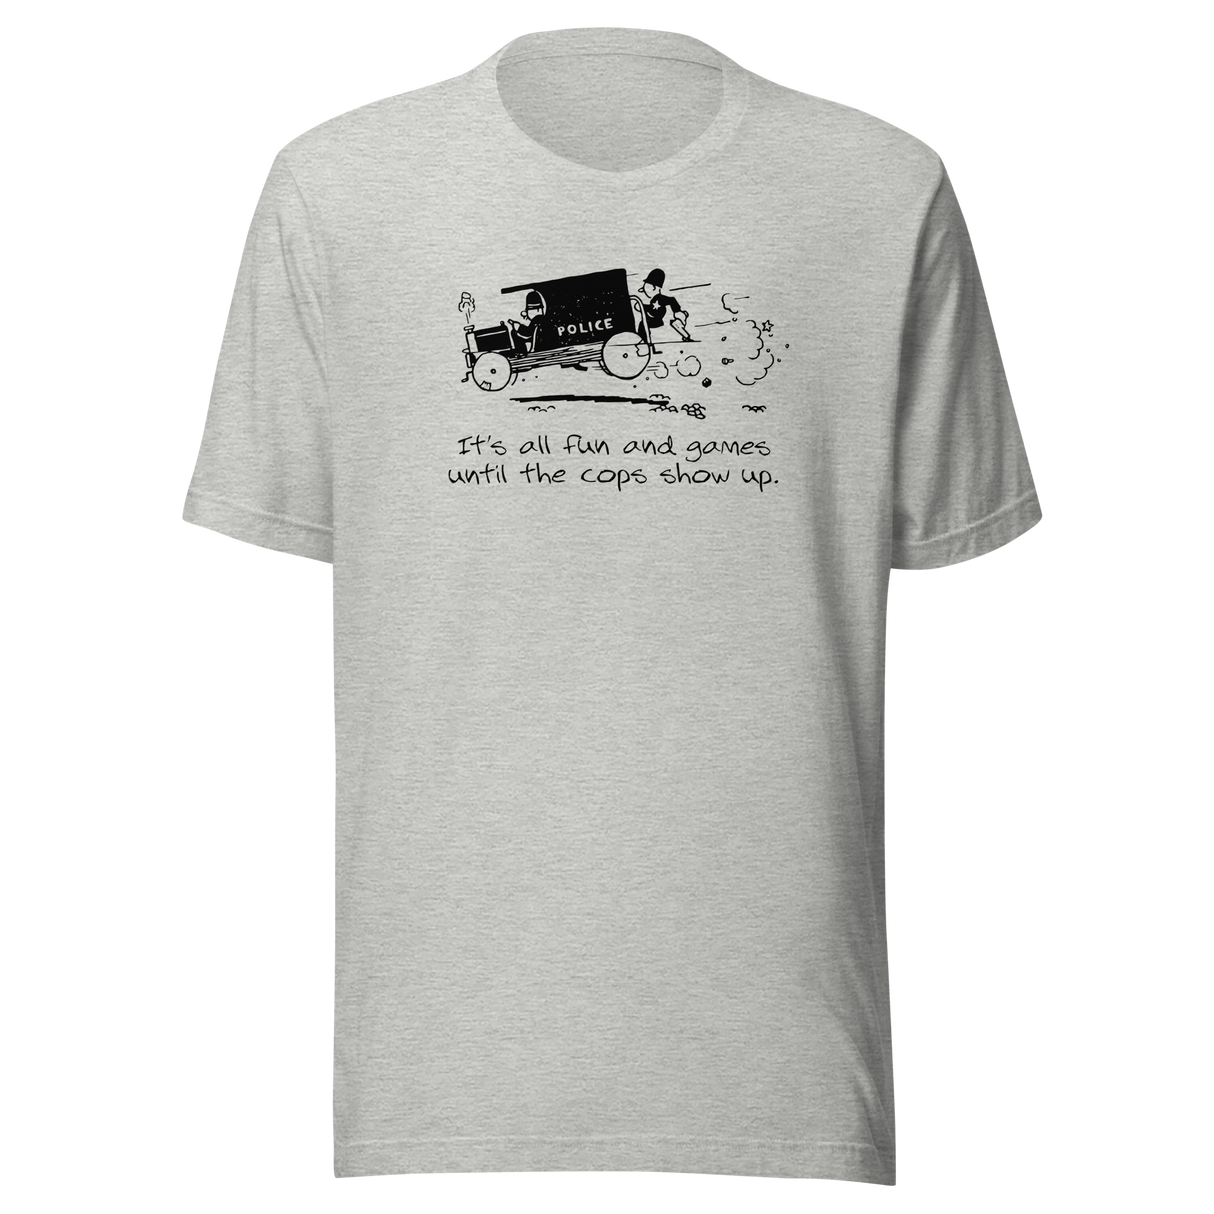 its-all-fun-and-games-until-the-cops-show-up-games-tee-humor-t-shirt-cops-tee-funny-t-shirt-truth-tee#color_athletic-heather